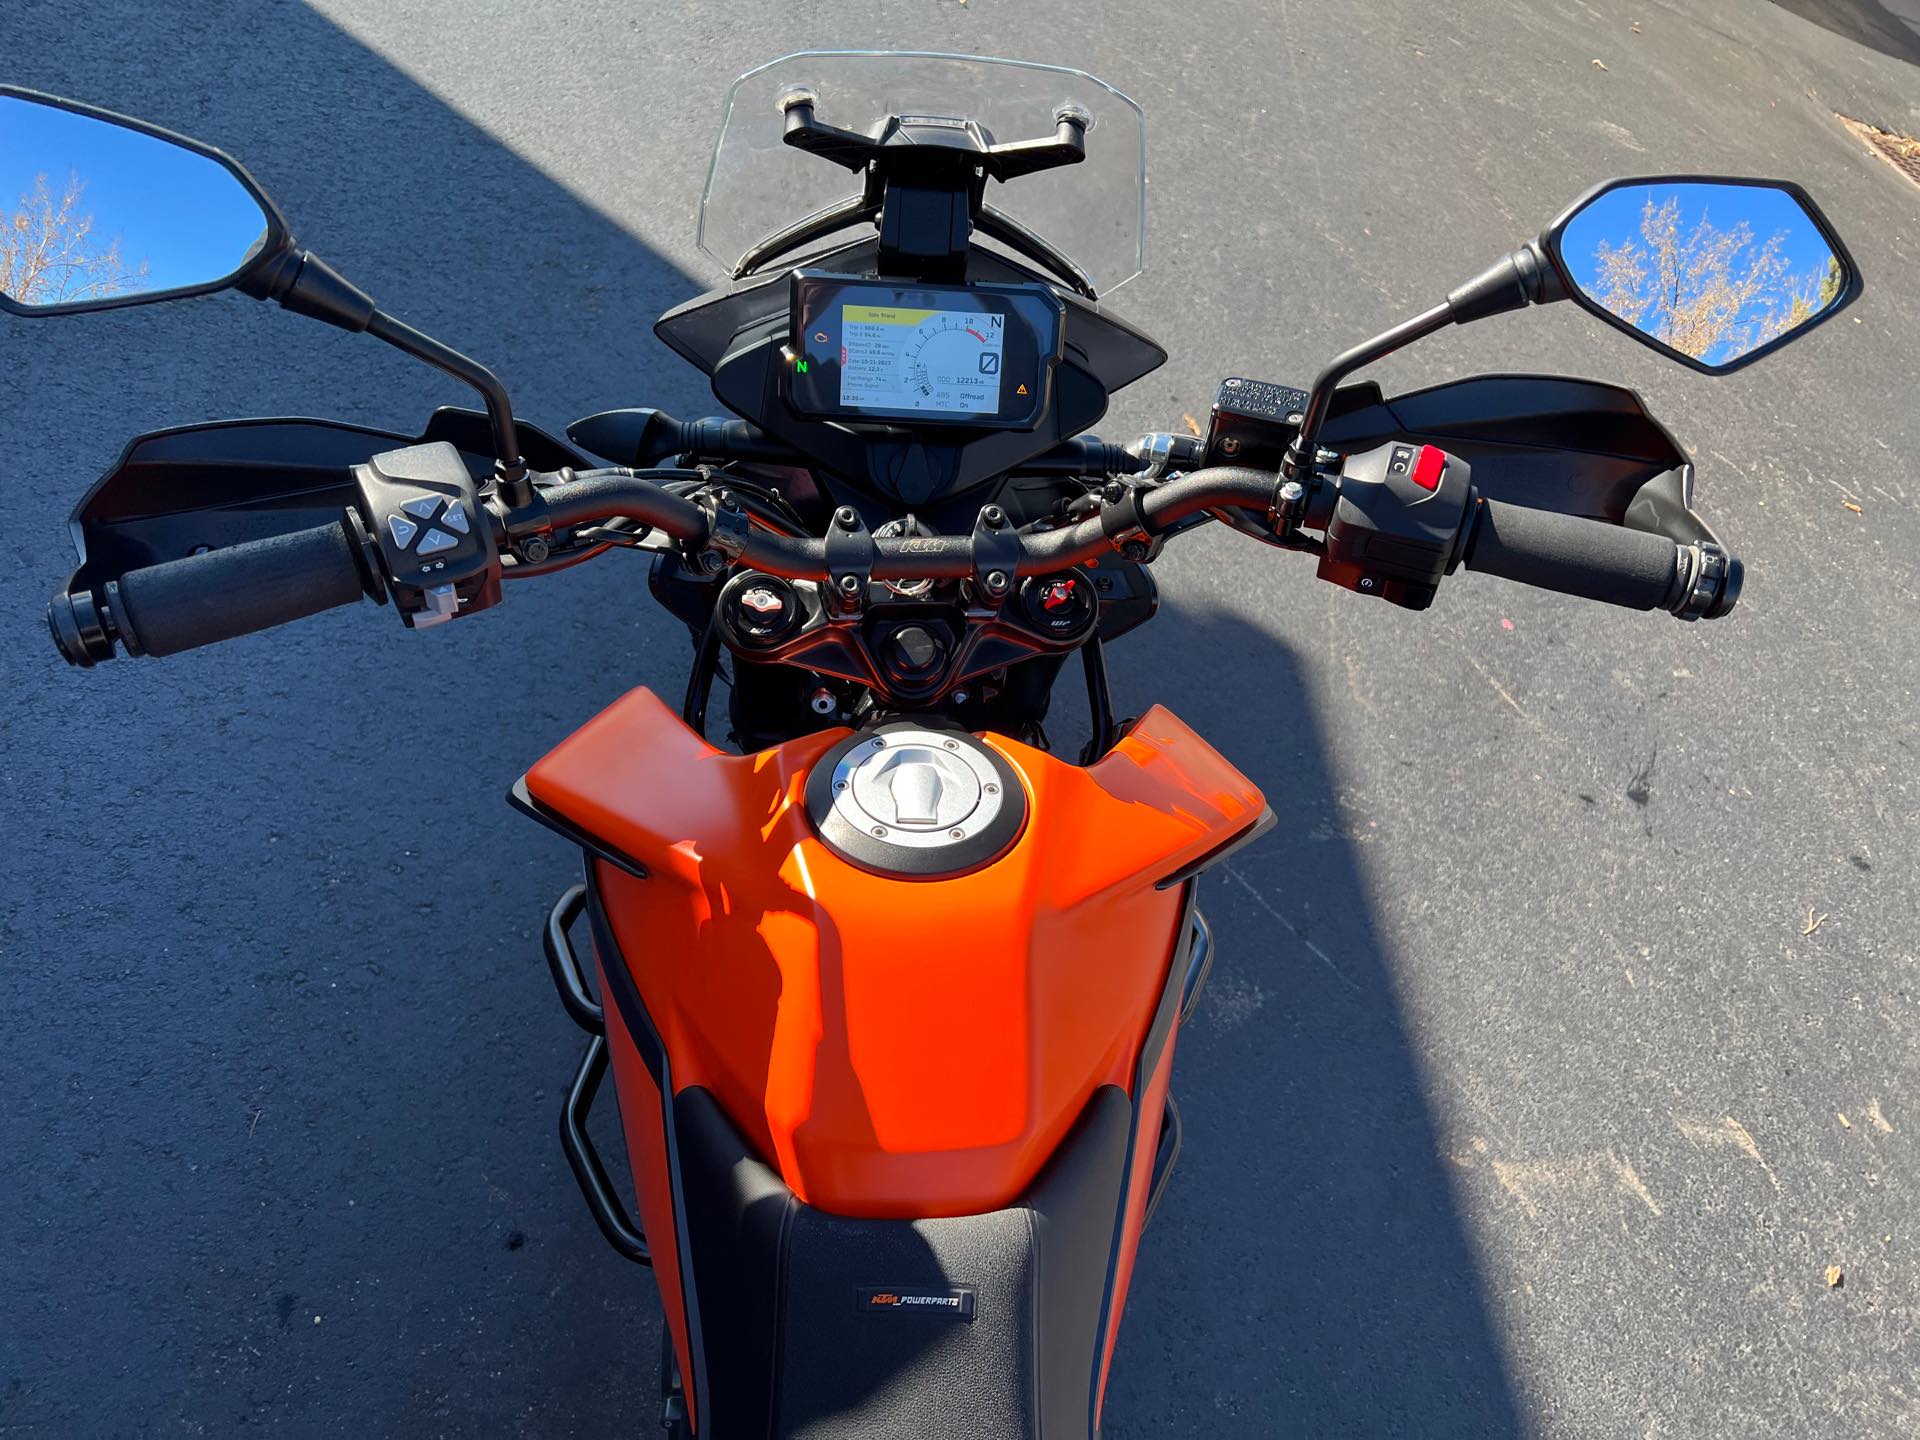 2020 KTM Duke 390 at Aces Motorcycles - Fort Collins